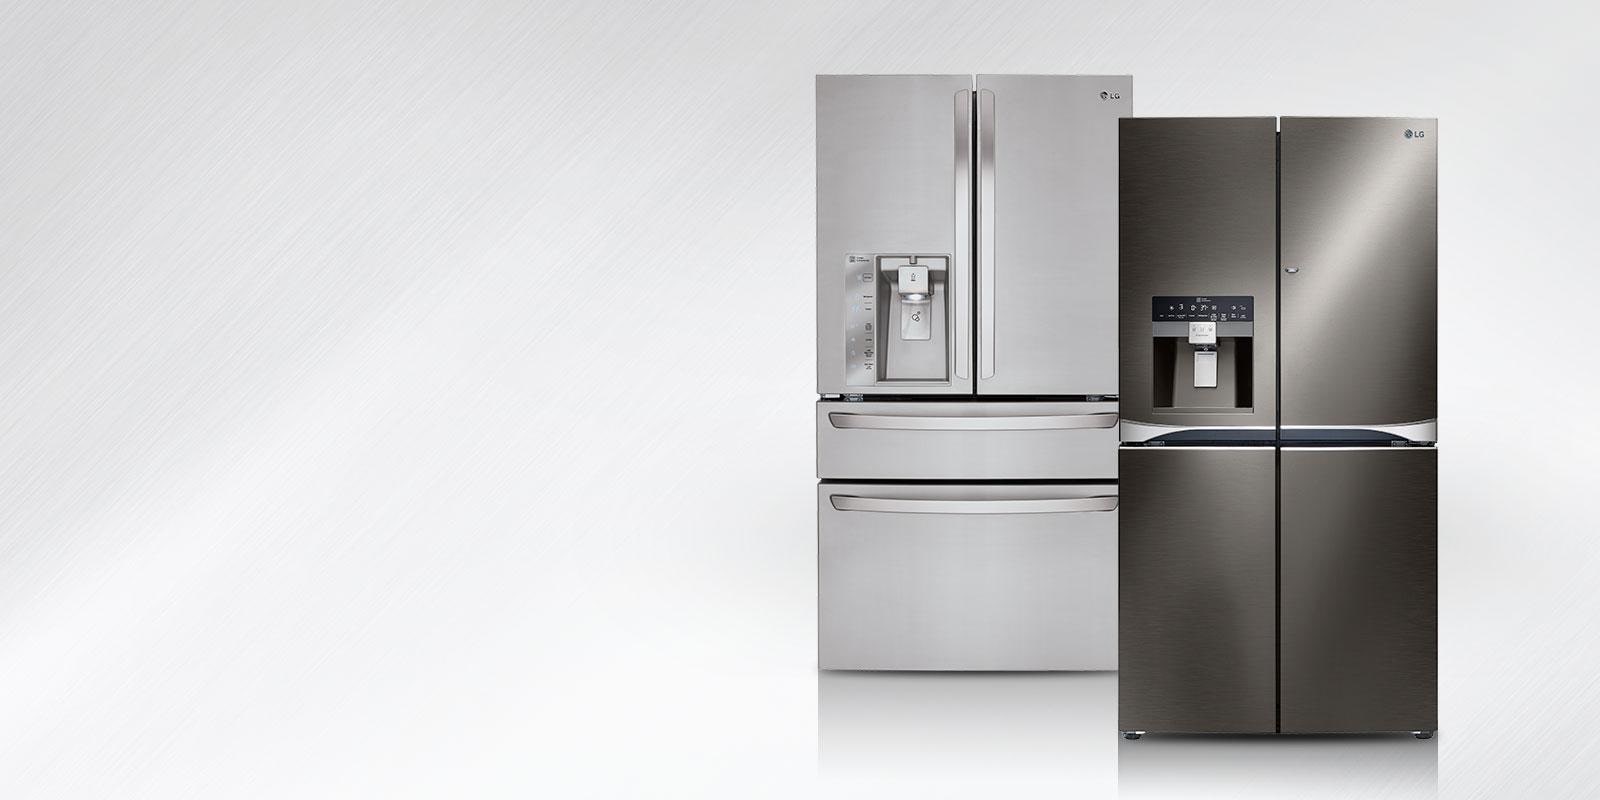 What are the optimal LG refrigerator settings?